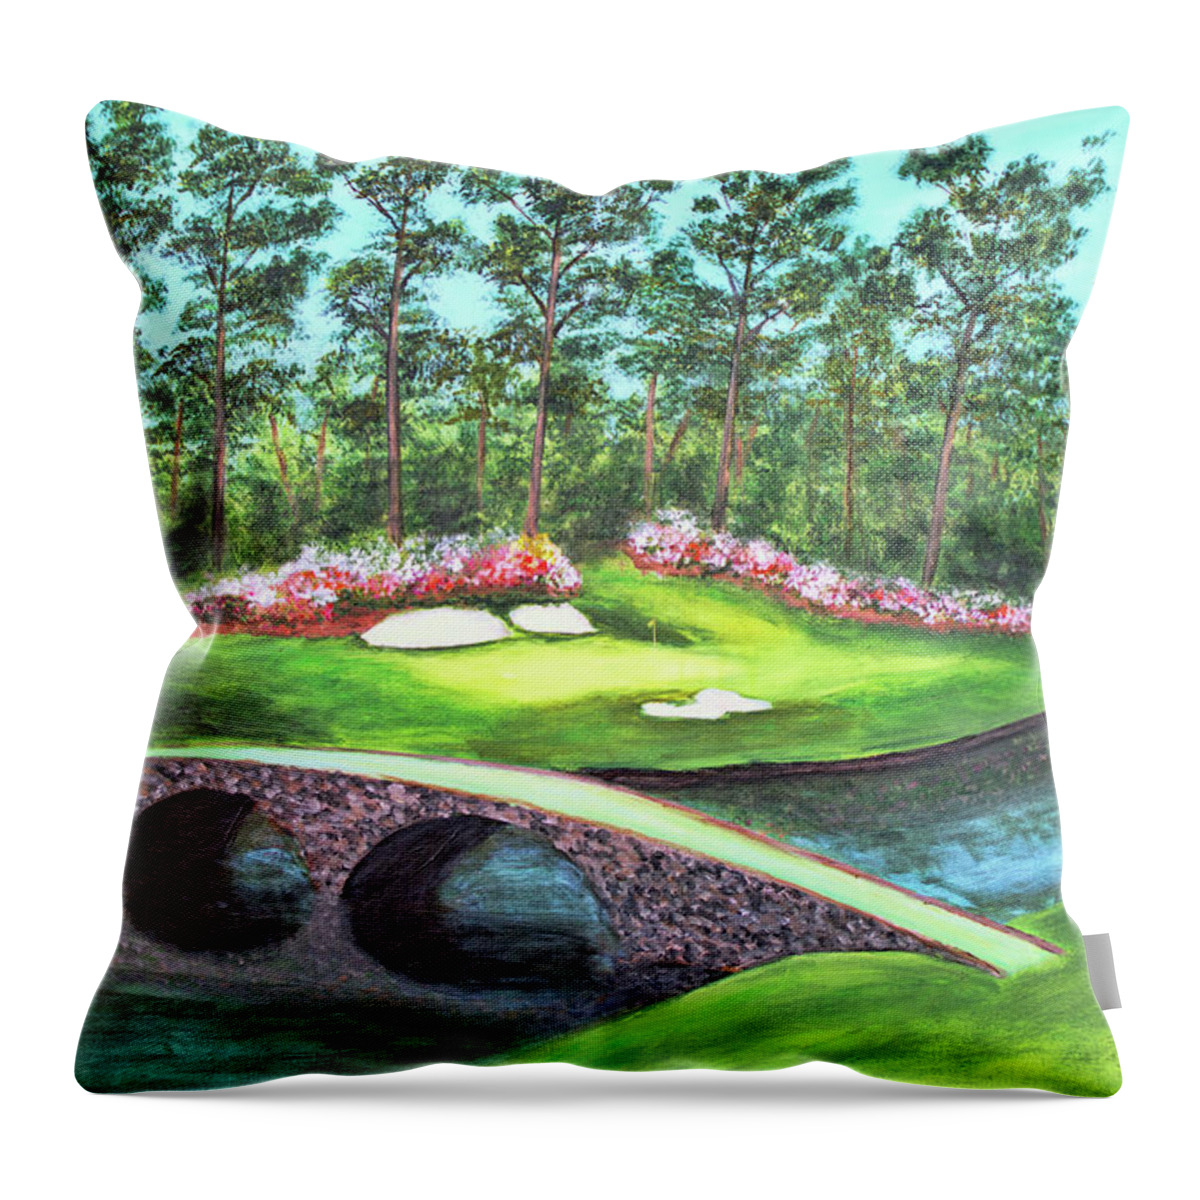 Ken Figurski Throw Pillow featuring the painting 12th Hole At Augusta National by Ken Figurski